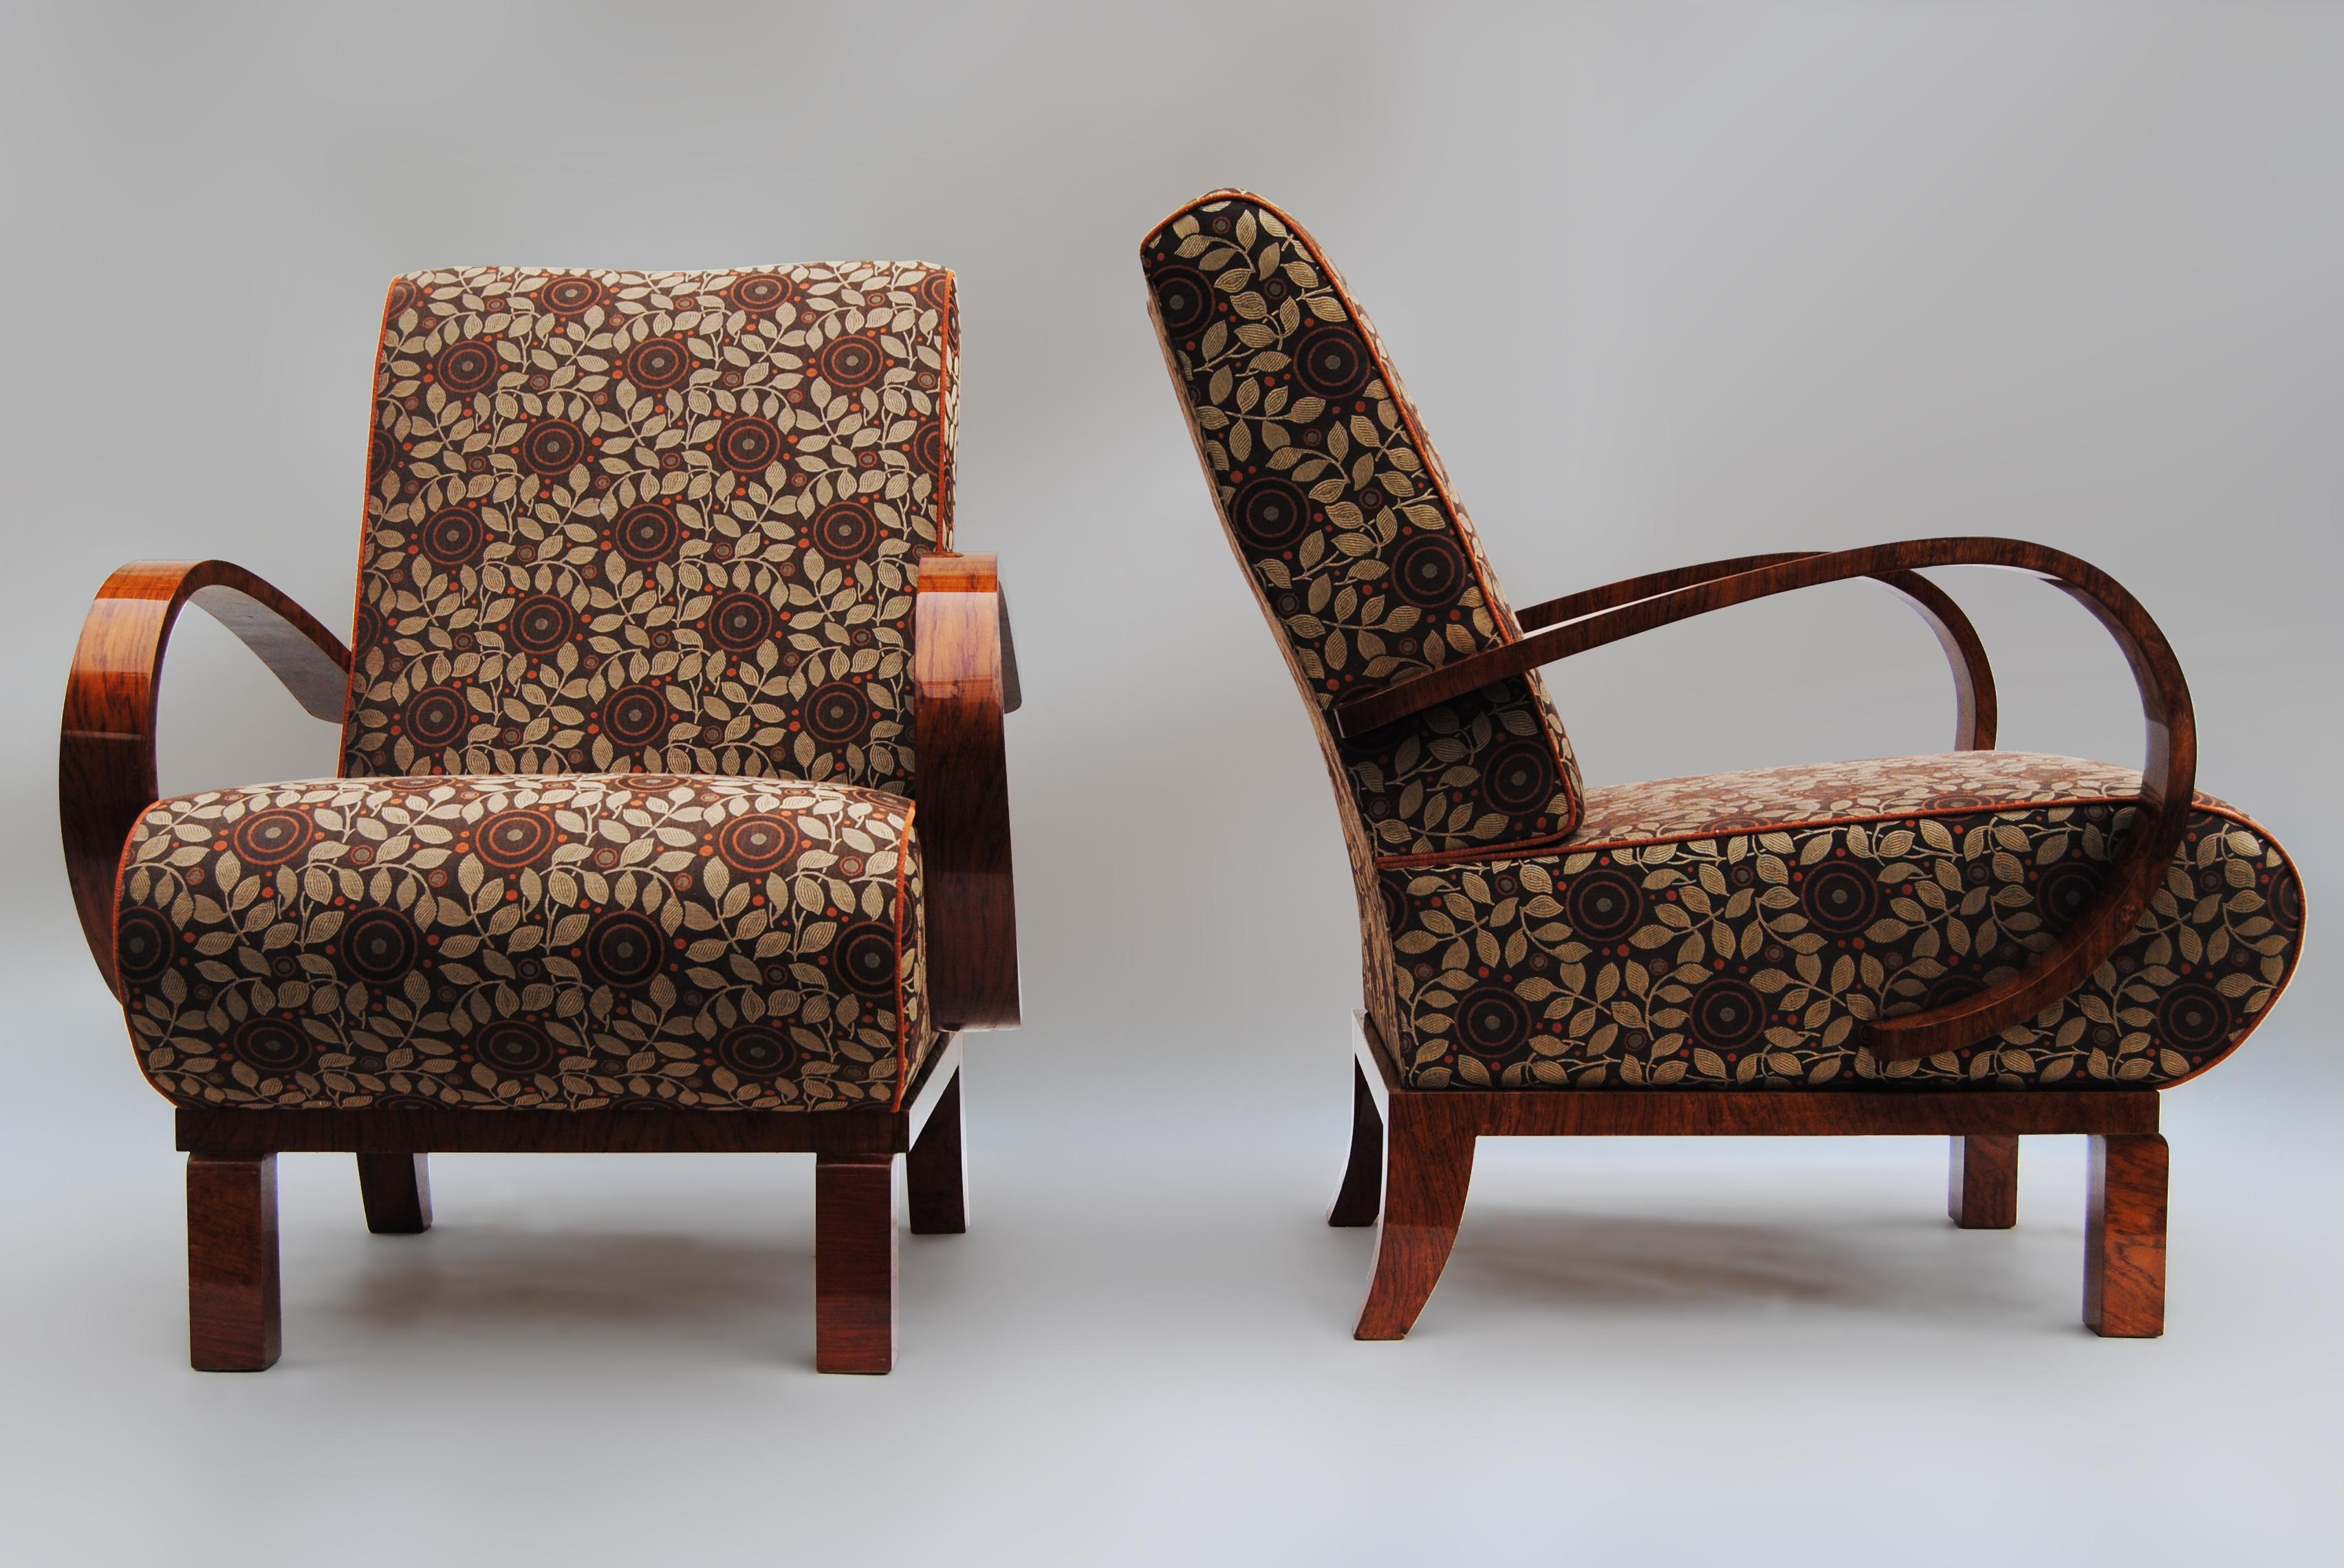 Czech Completely Restored Pair of Art Deco Armchairs, New Upholstery, High Gloss For Sale